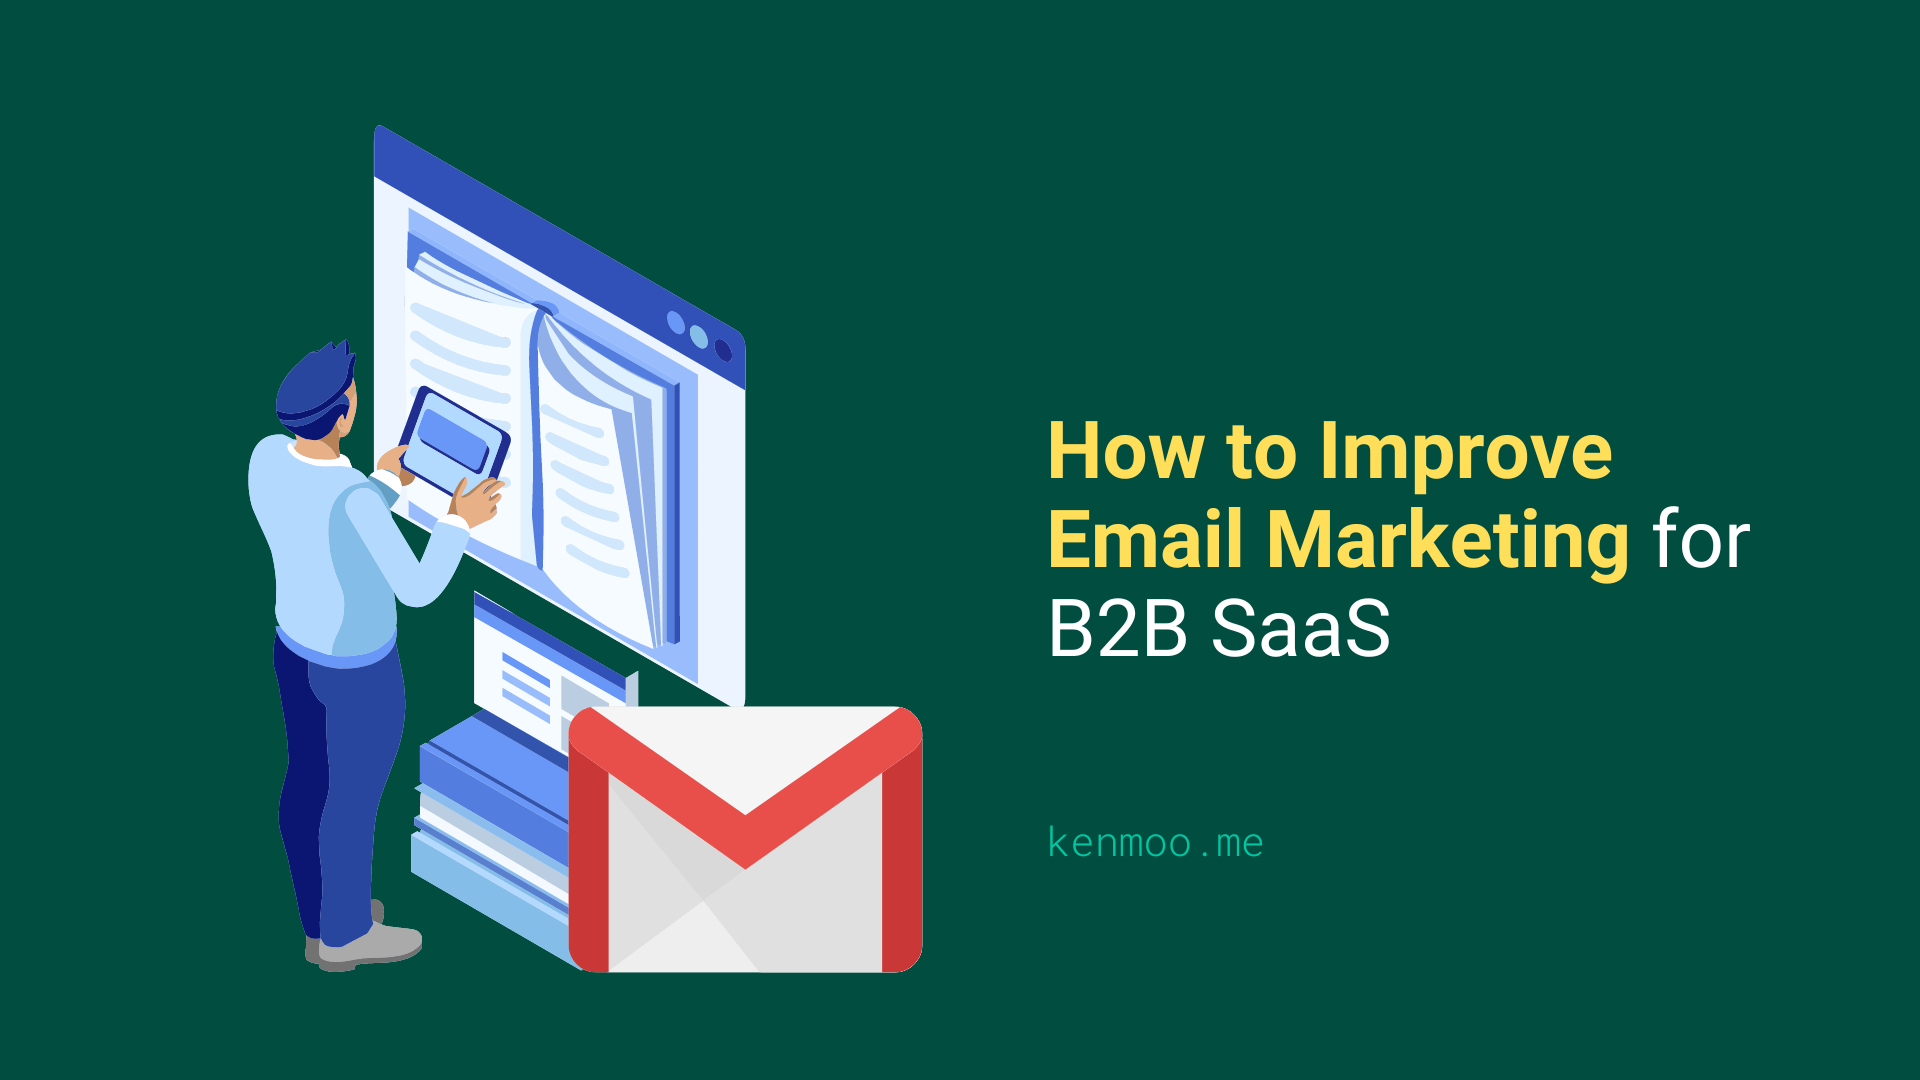 How to Improve Email Marketing for B2B SaaS